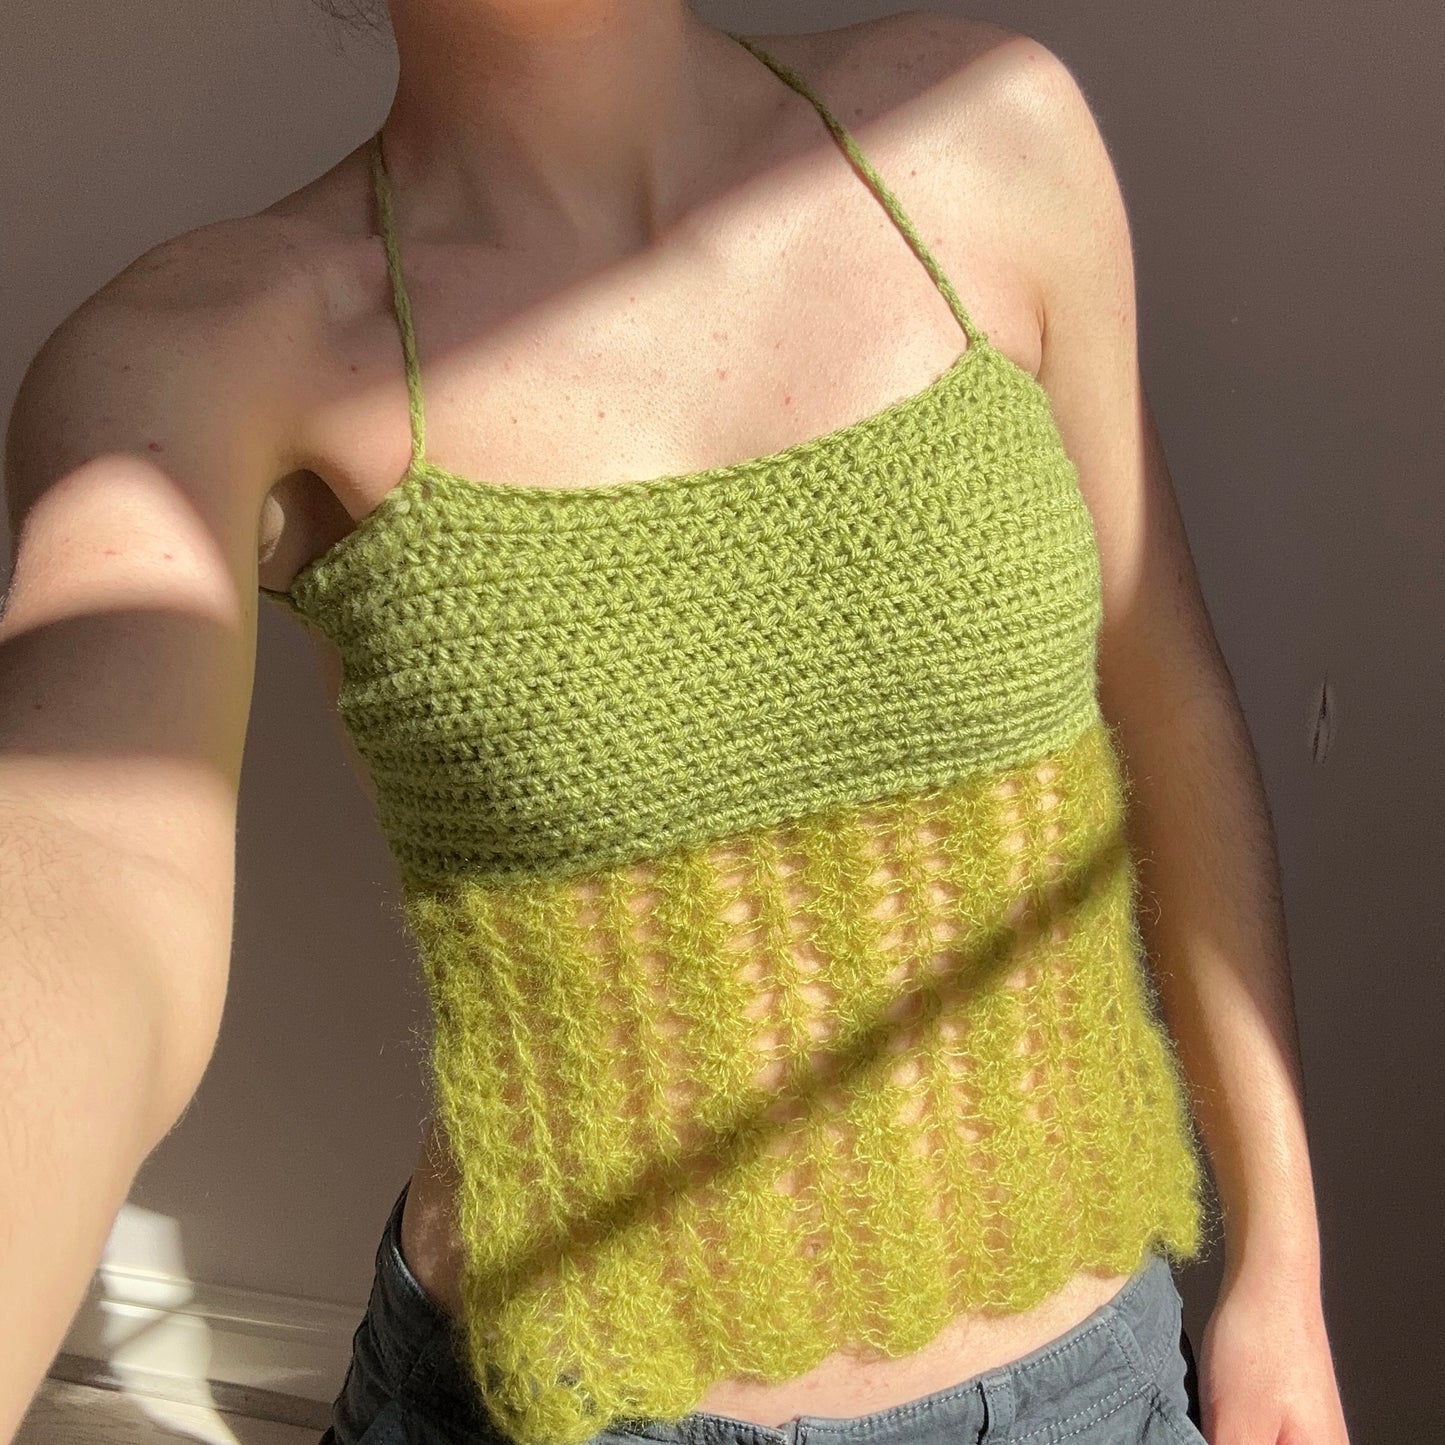 Handmade crochet mohair lace cami top in green